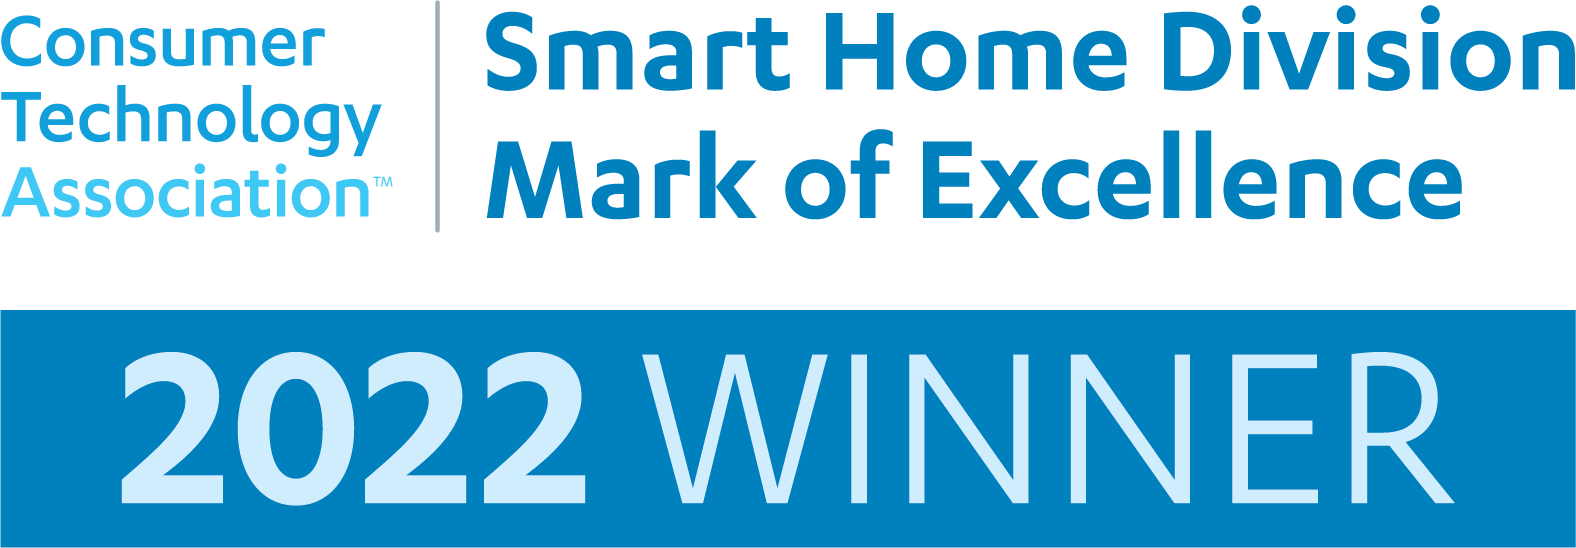 Image of the Smart Home Division Mark of Excellence Winner Award 2022